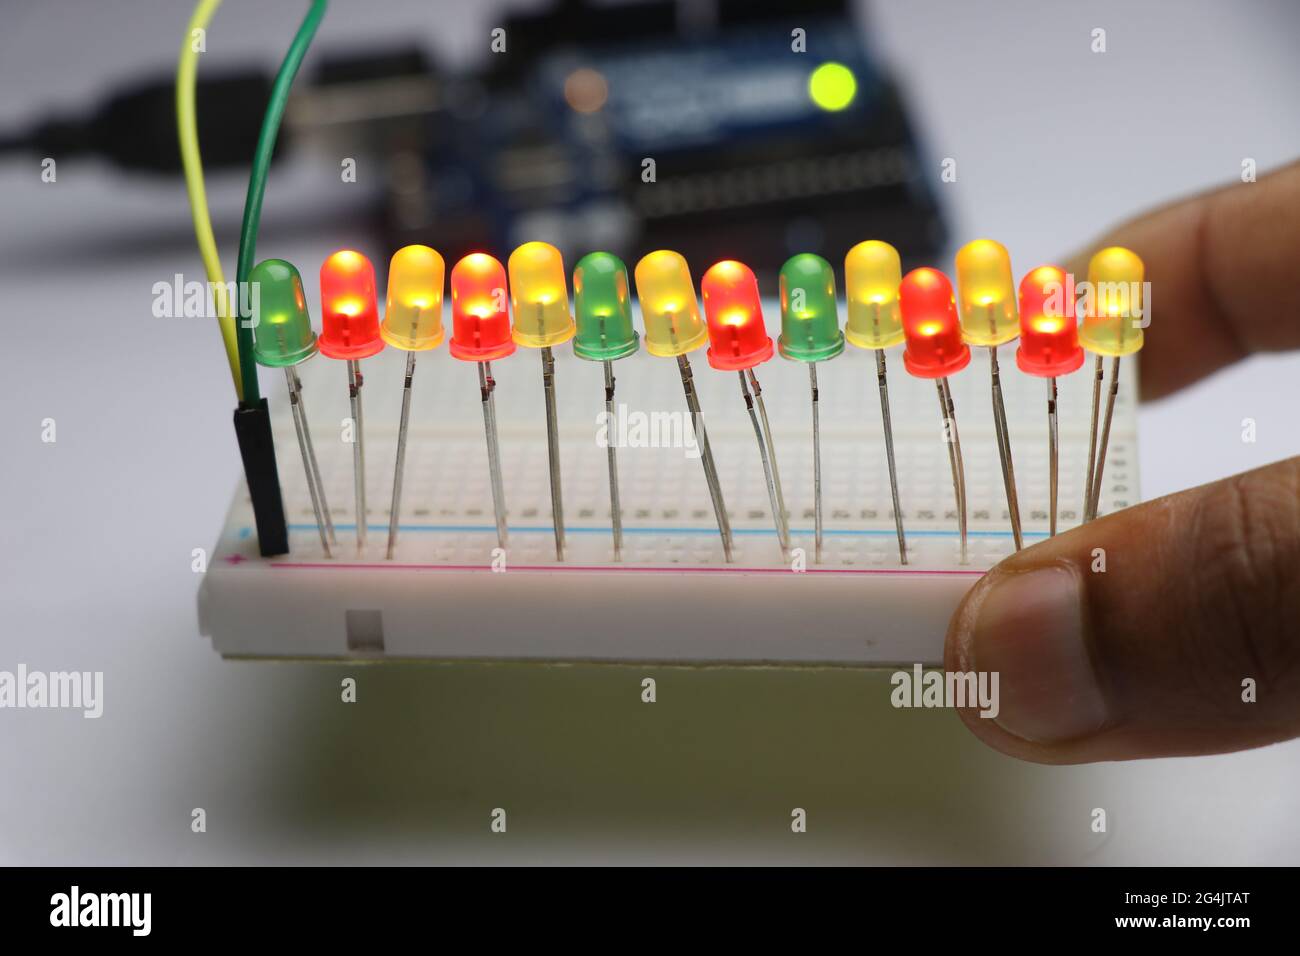 Light emitting diodes on breadboard with glowing lights controlled by micro  controller board on background held in hand Stock Photo - Alamy